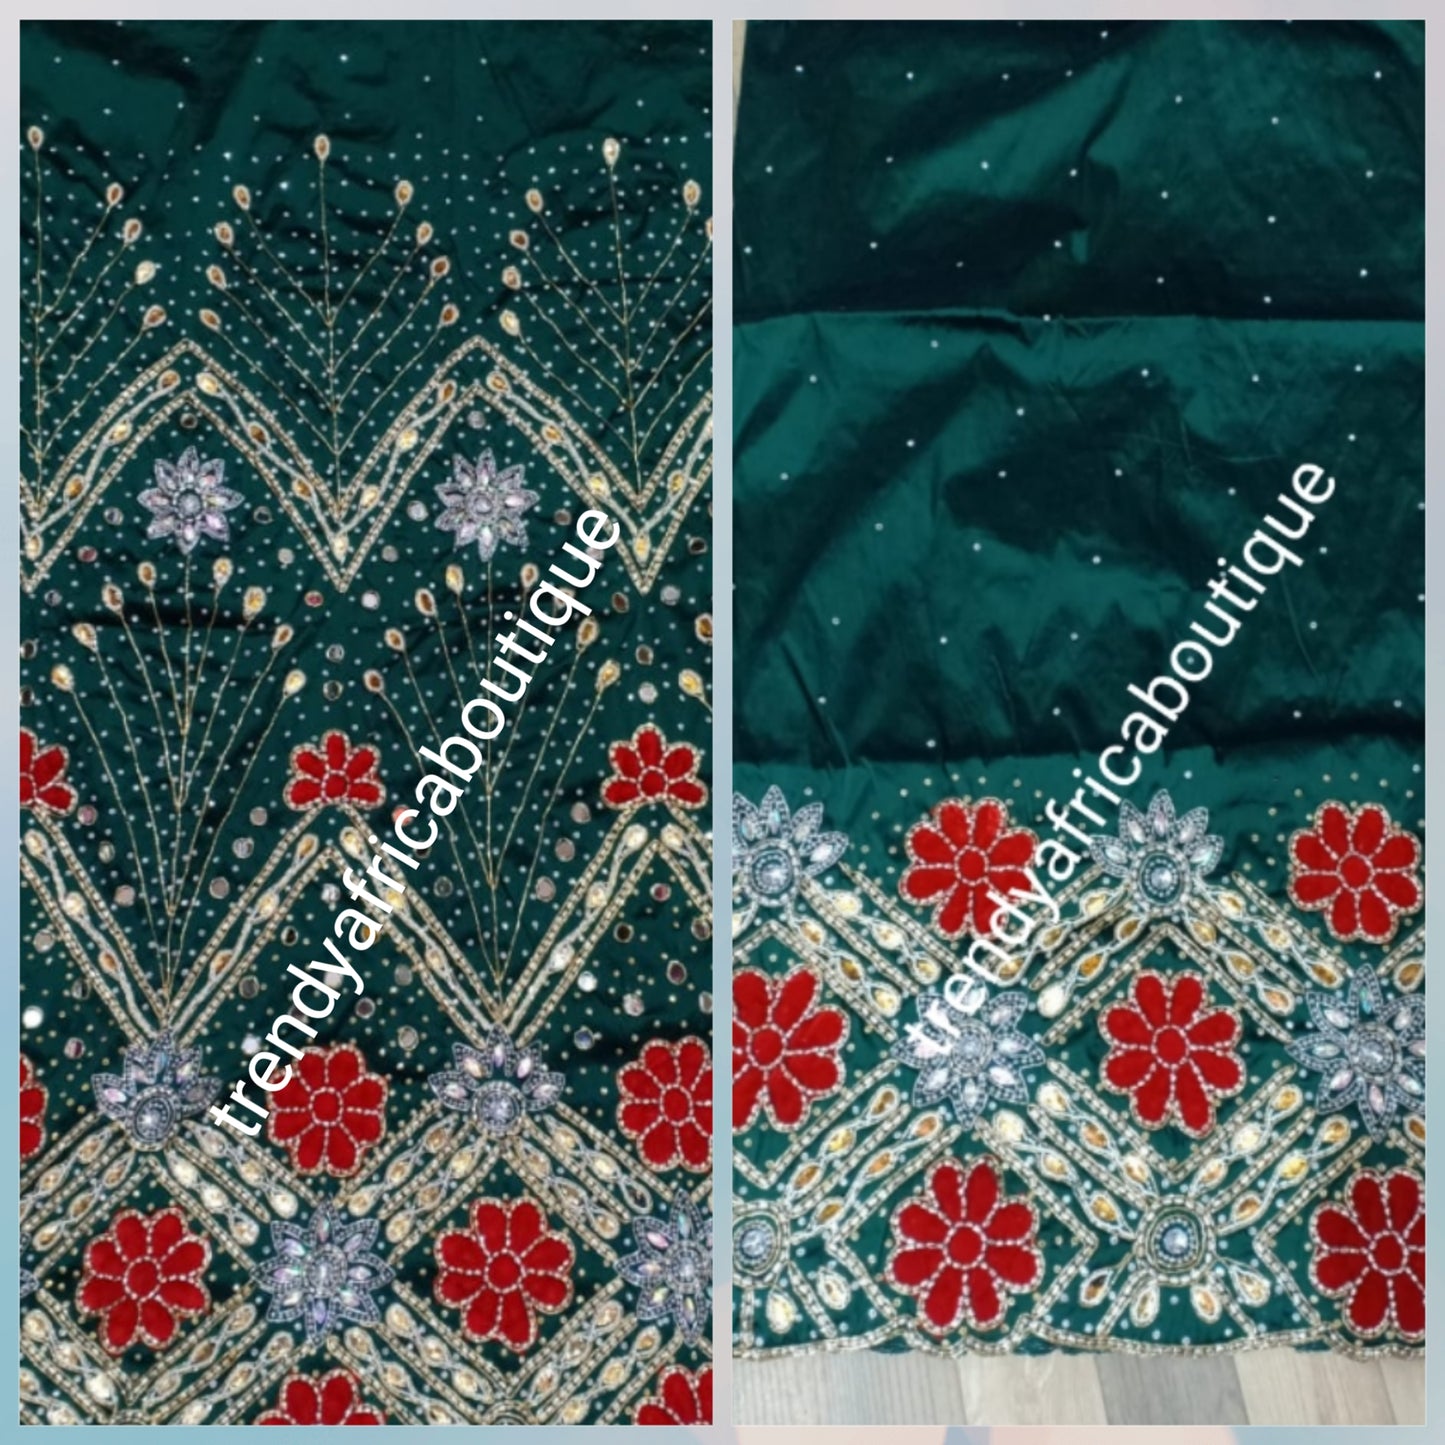 Sale: Ready to ship. Teal Green/red VIP Celebrant Nigerian women George wrapper. Niger/Igbo/delta traditional wedding George hand beaded and stoned for special occasion. 2.5yds + 2.5yds + 1.8yds net blouse. Feel the difference in quality Georges.